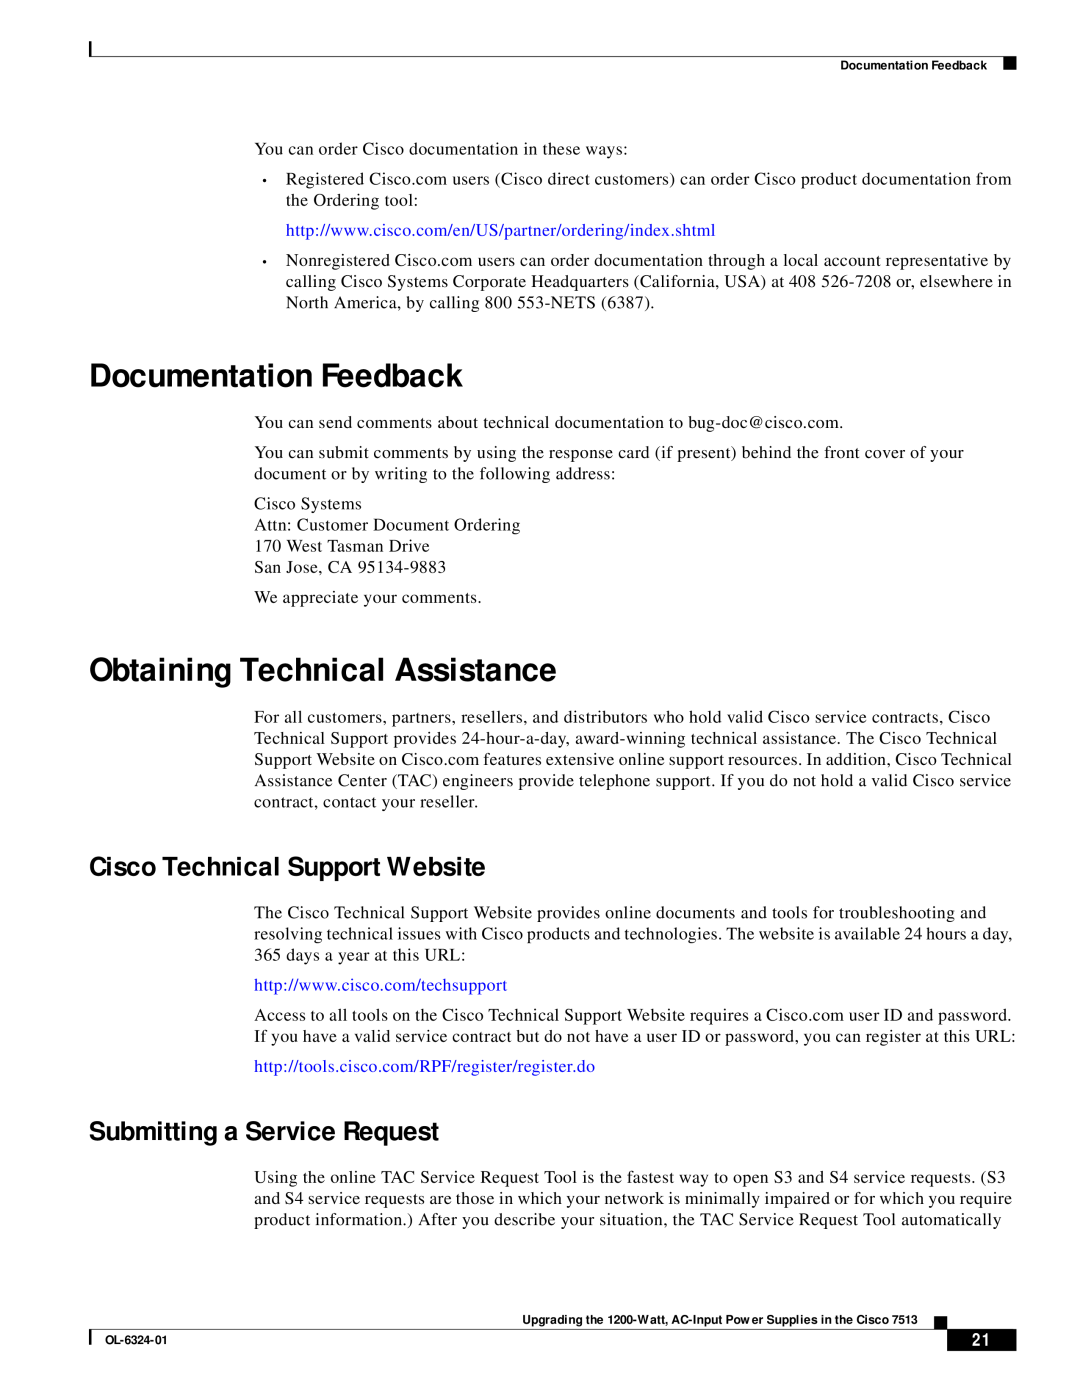 Cisco Systems 7513 manual Documentation Feedback, Obtaining Technical Assistance, Cisco Technical Support Website 